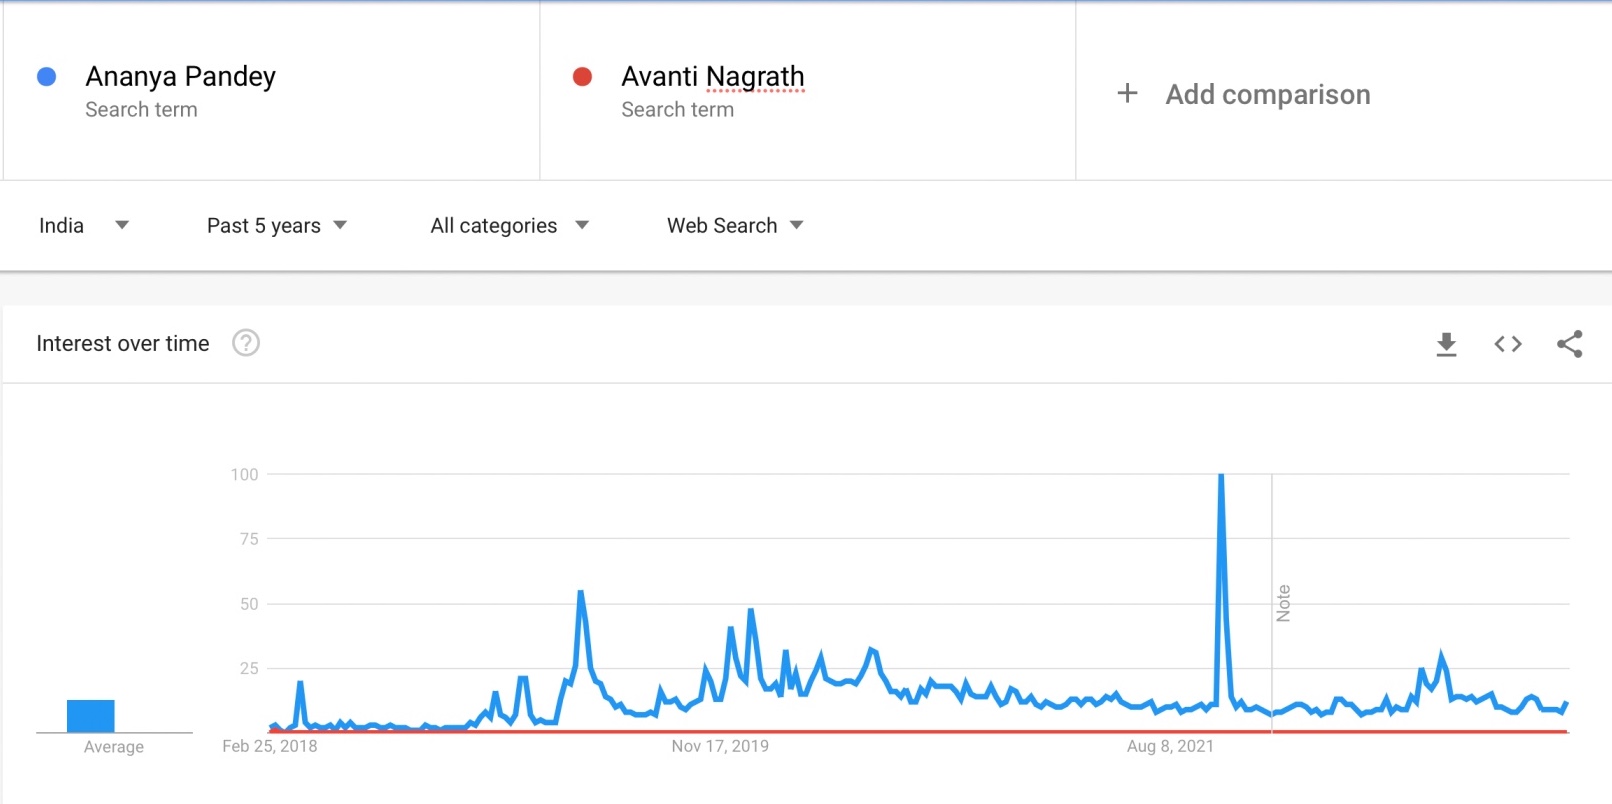 Search Comparison between Ananya pandey a bollywood actor and Avanti Nagrath an indian supermodel shows a staggering difference 2